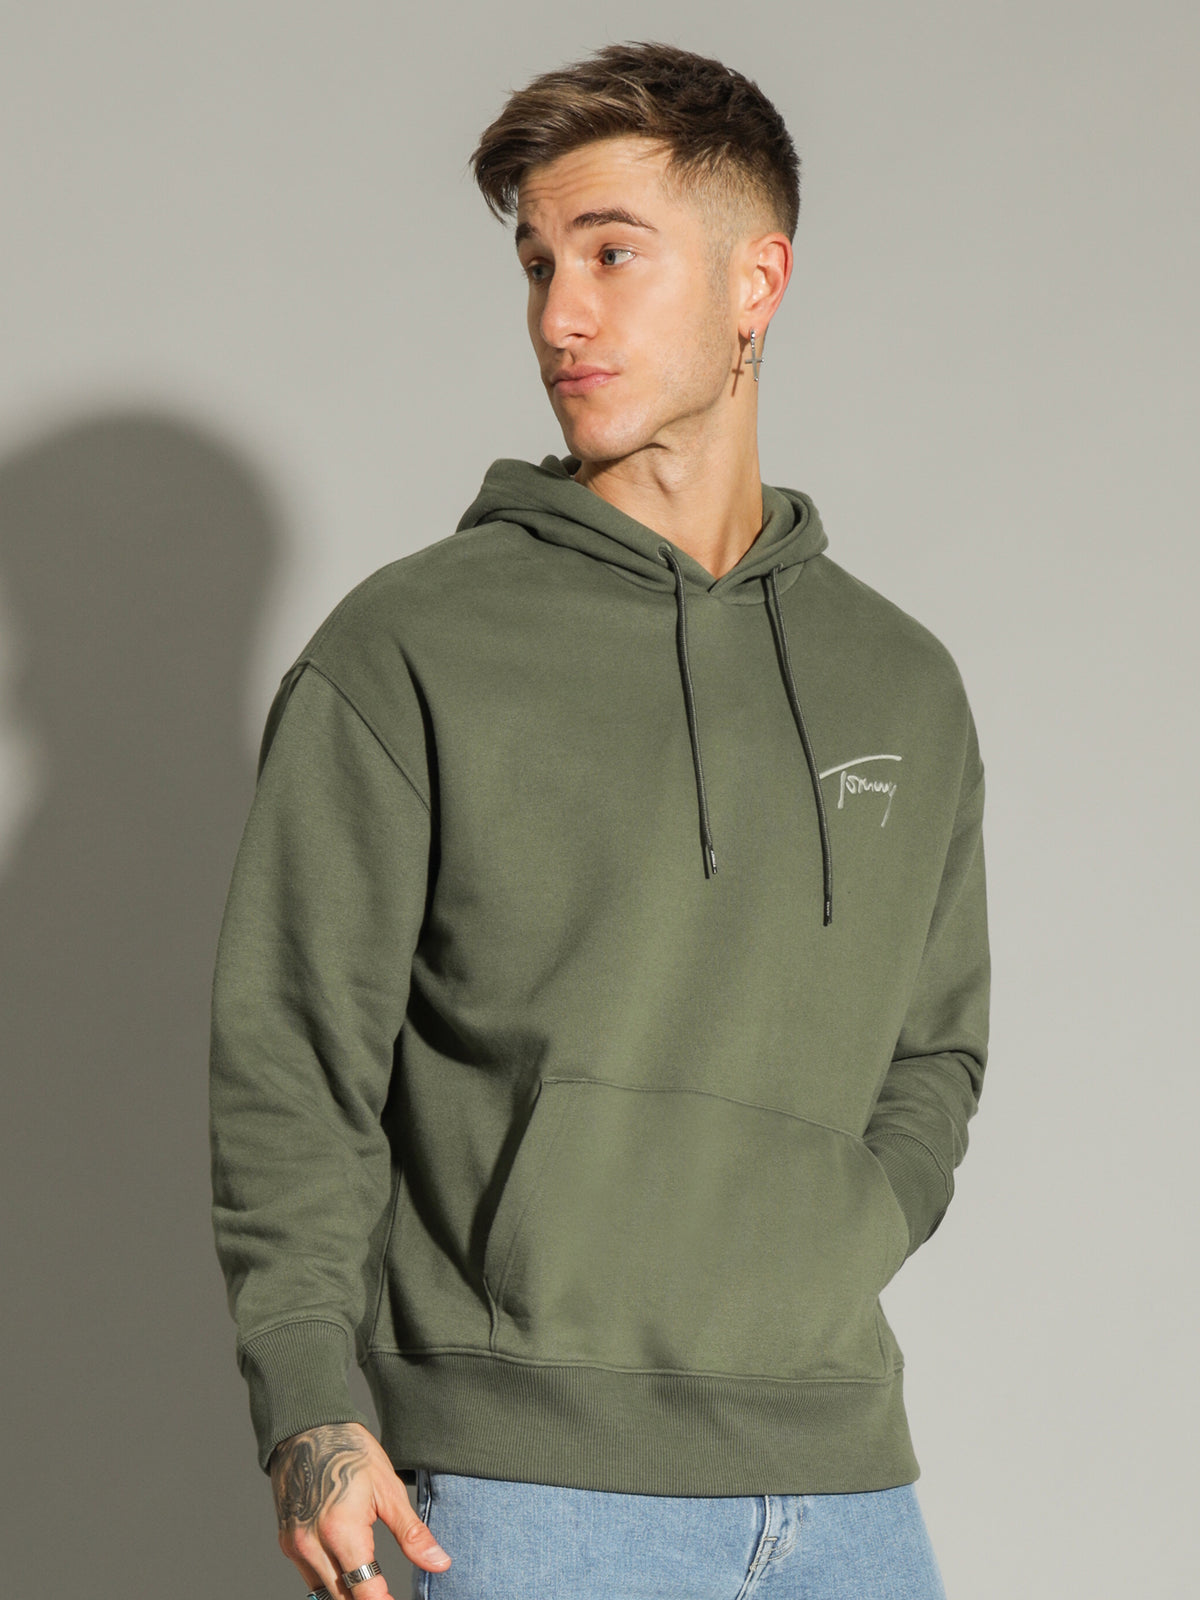 Signature Hoodie in Avalon Green